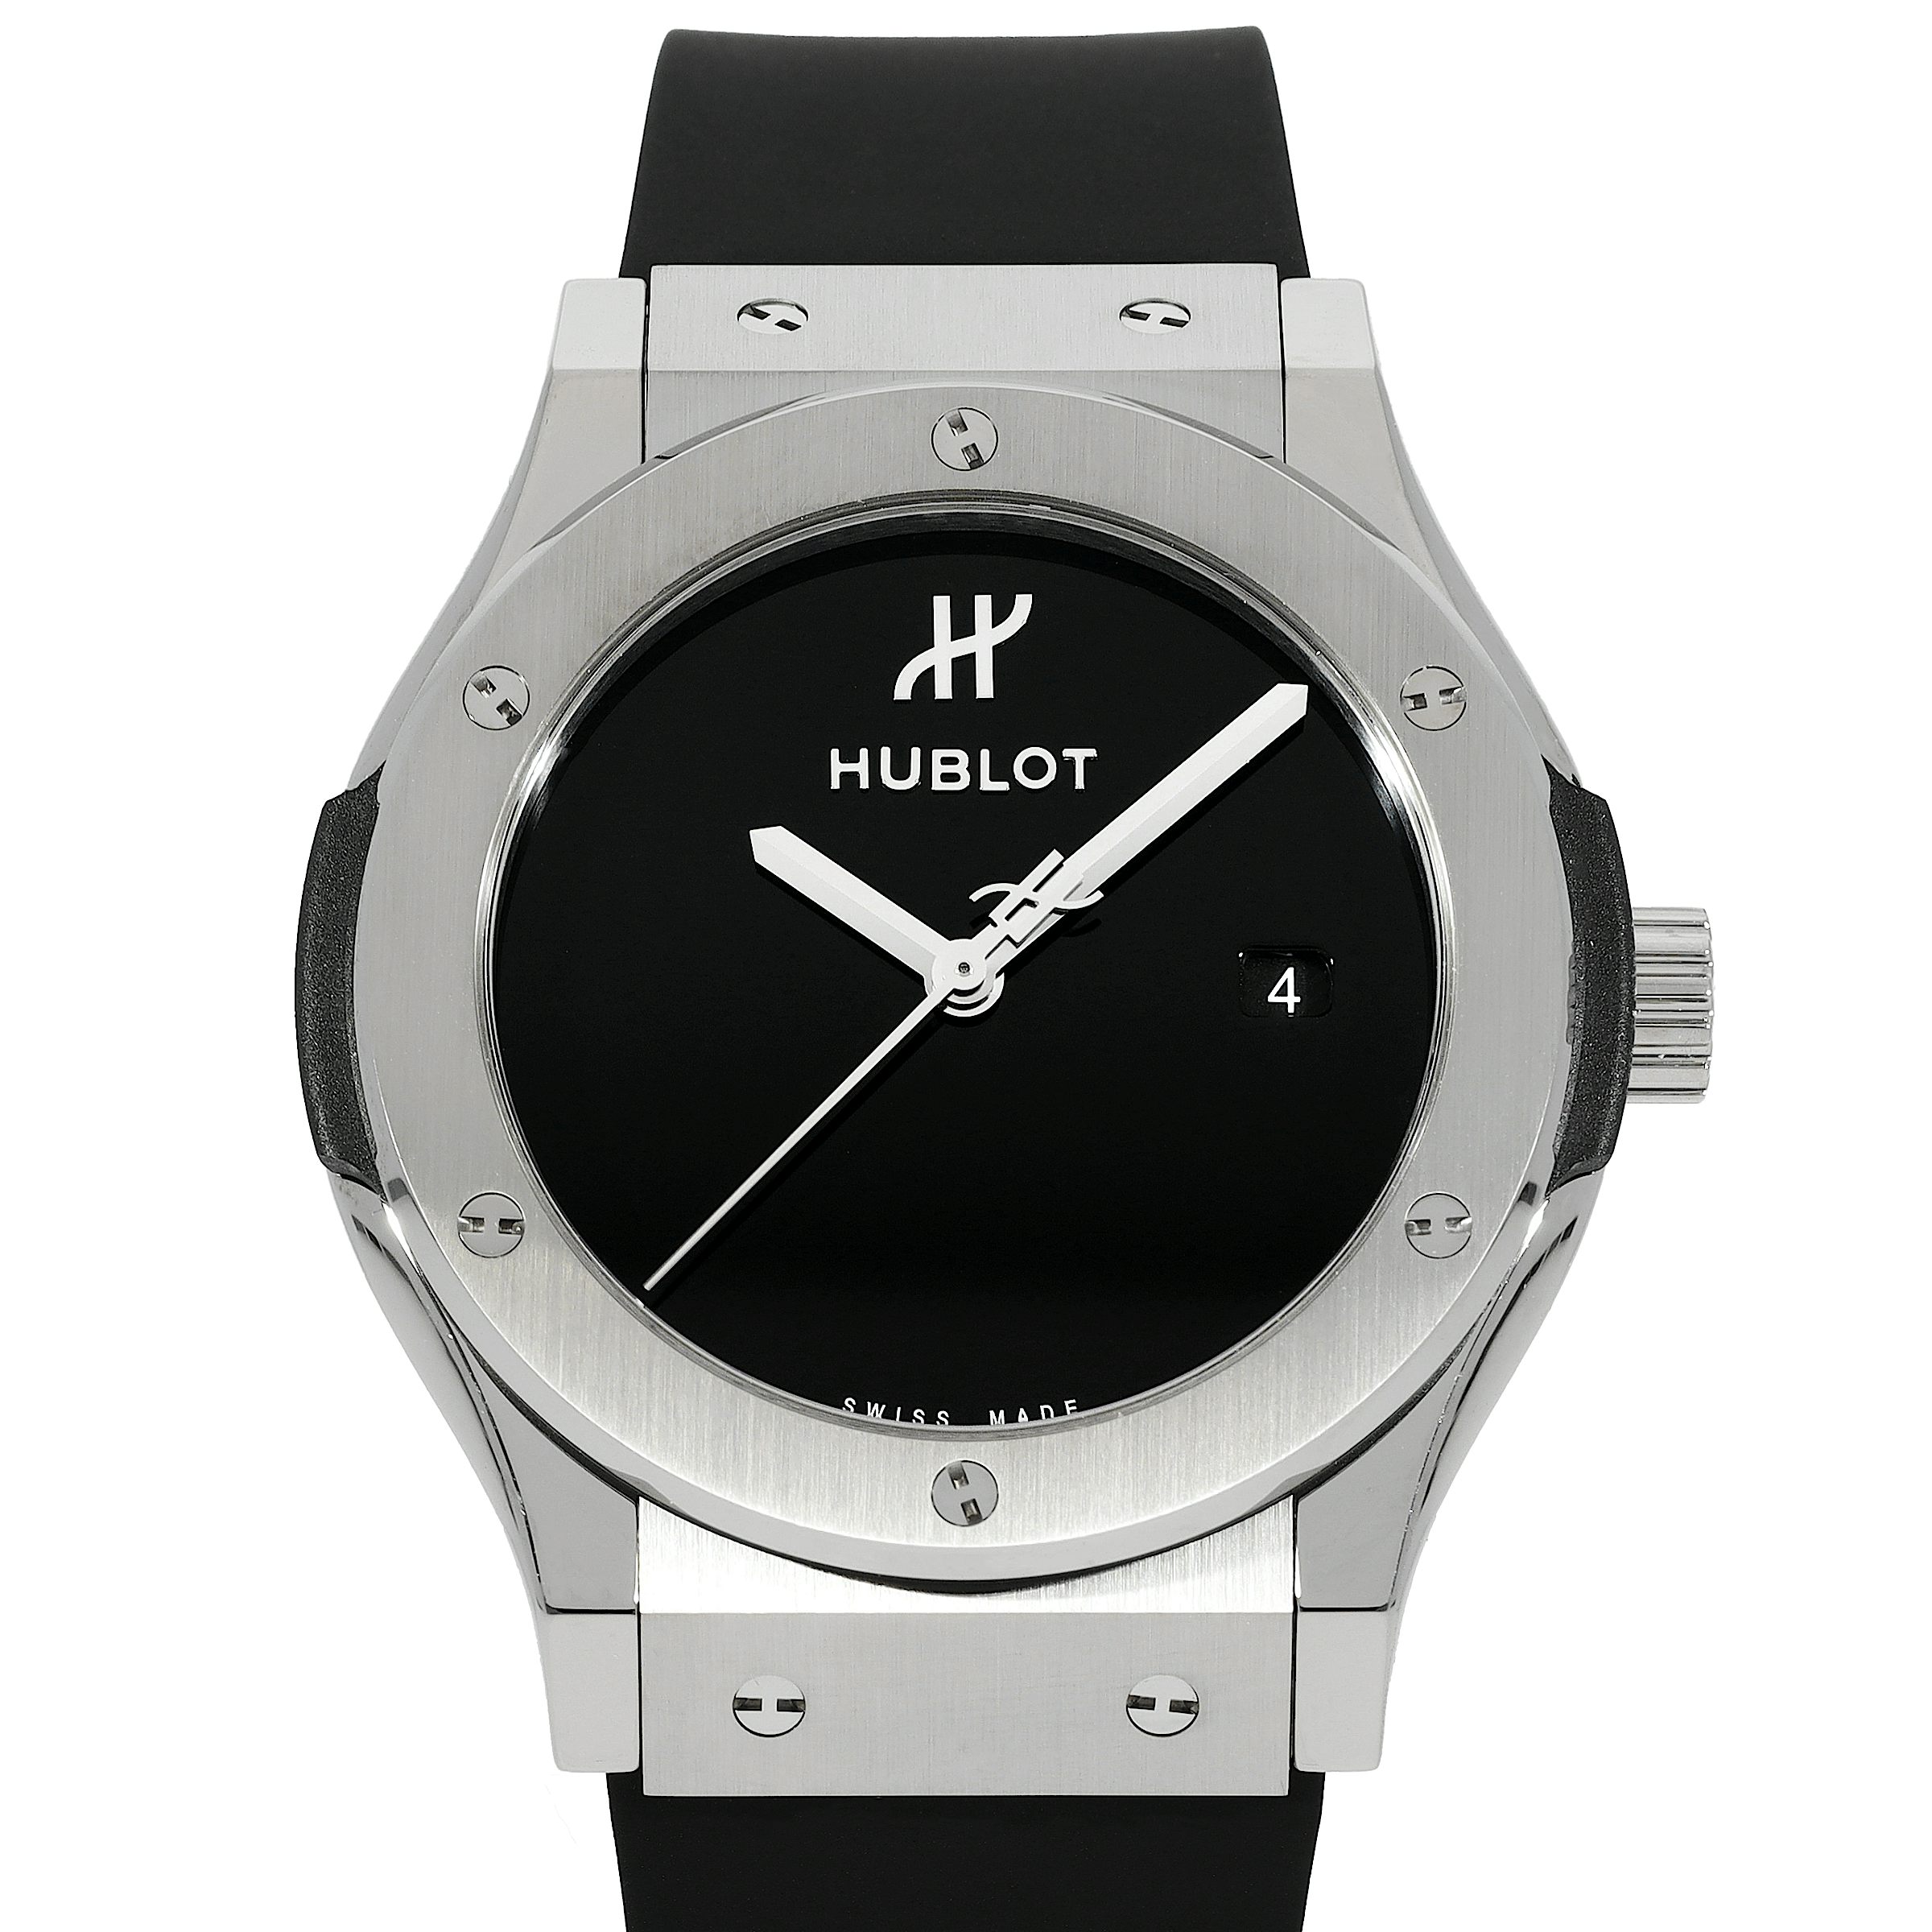 Hublot Classic Fusion 40 Years Anniversary Collection - Review, Price